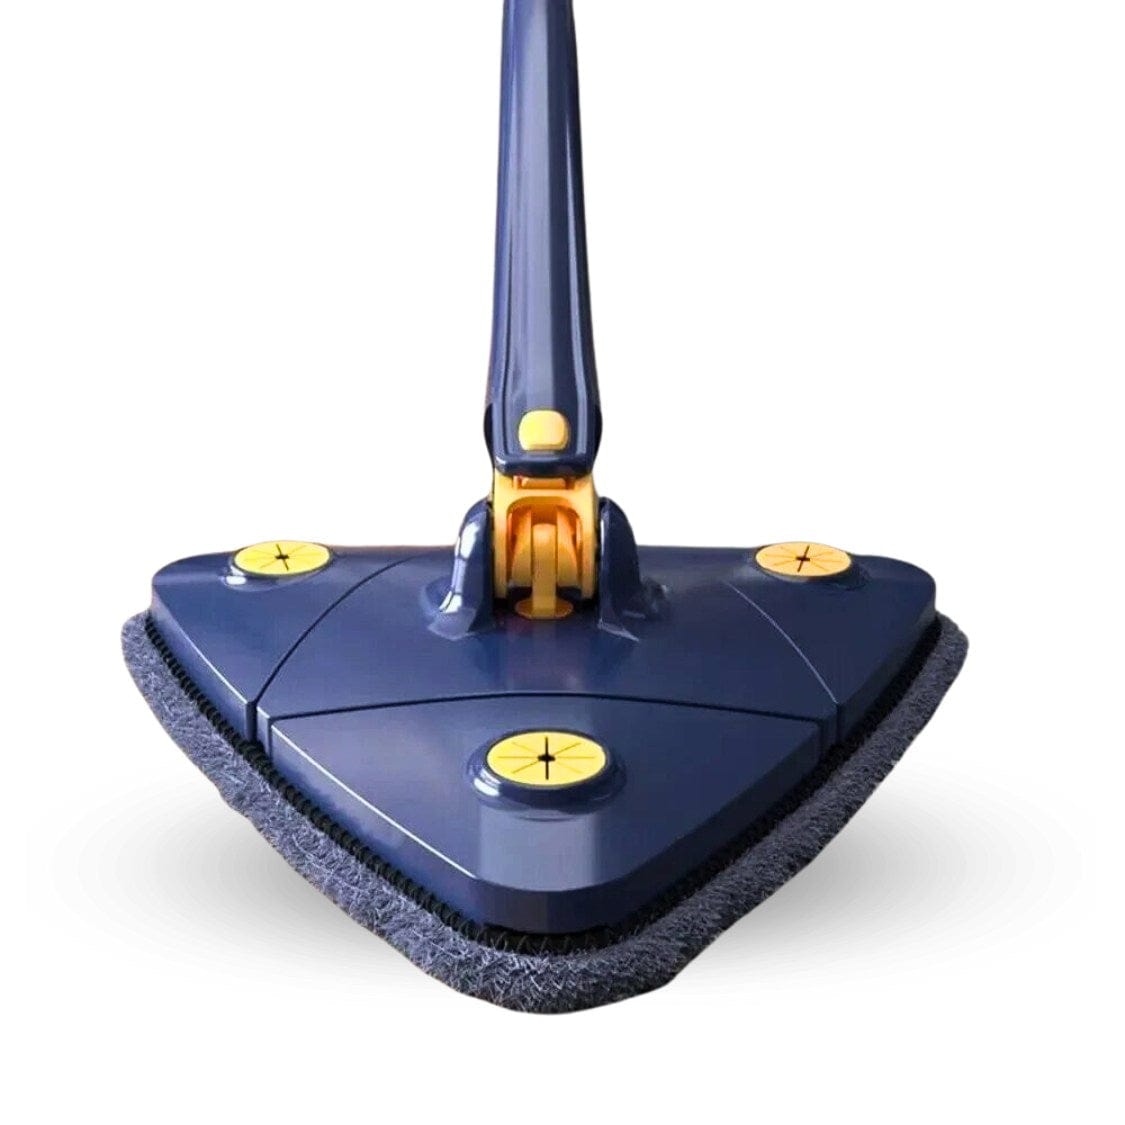 Home Finesse Space-Saving Floor Cleaning Mop - A Must-Have for Every Home